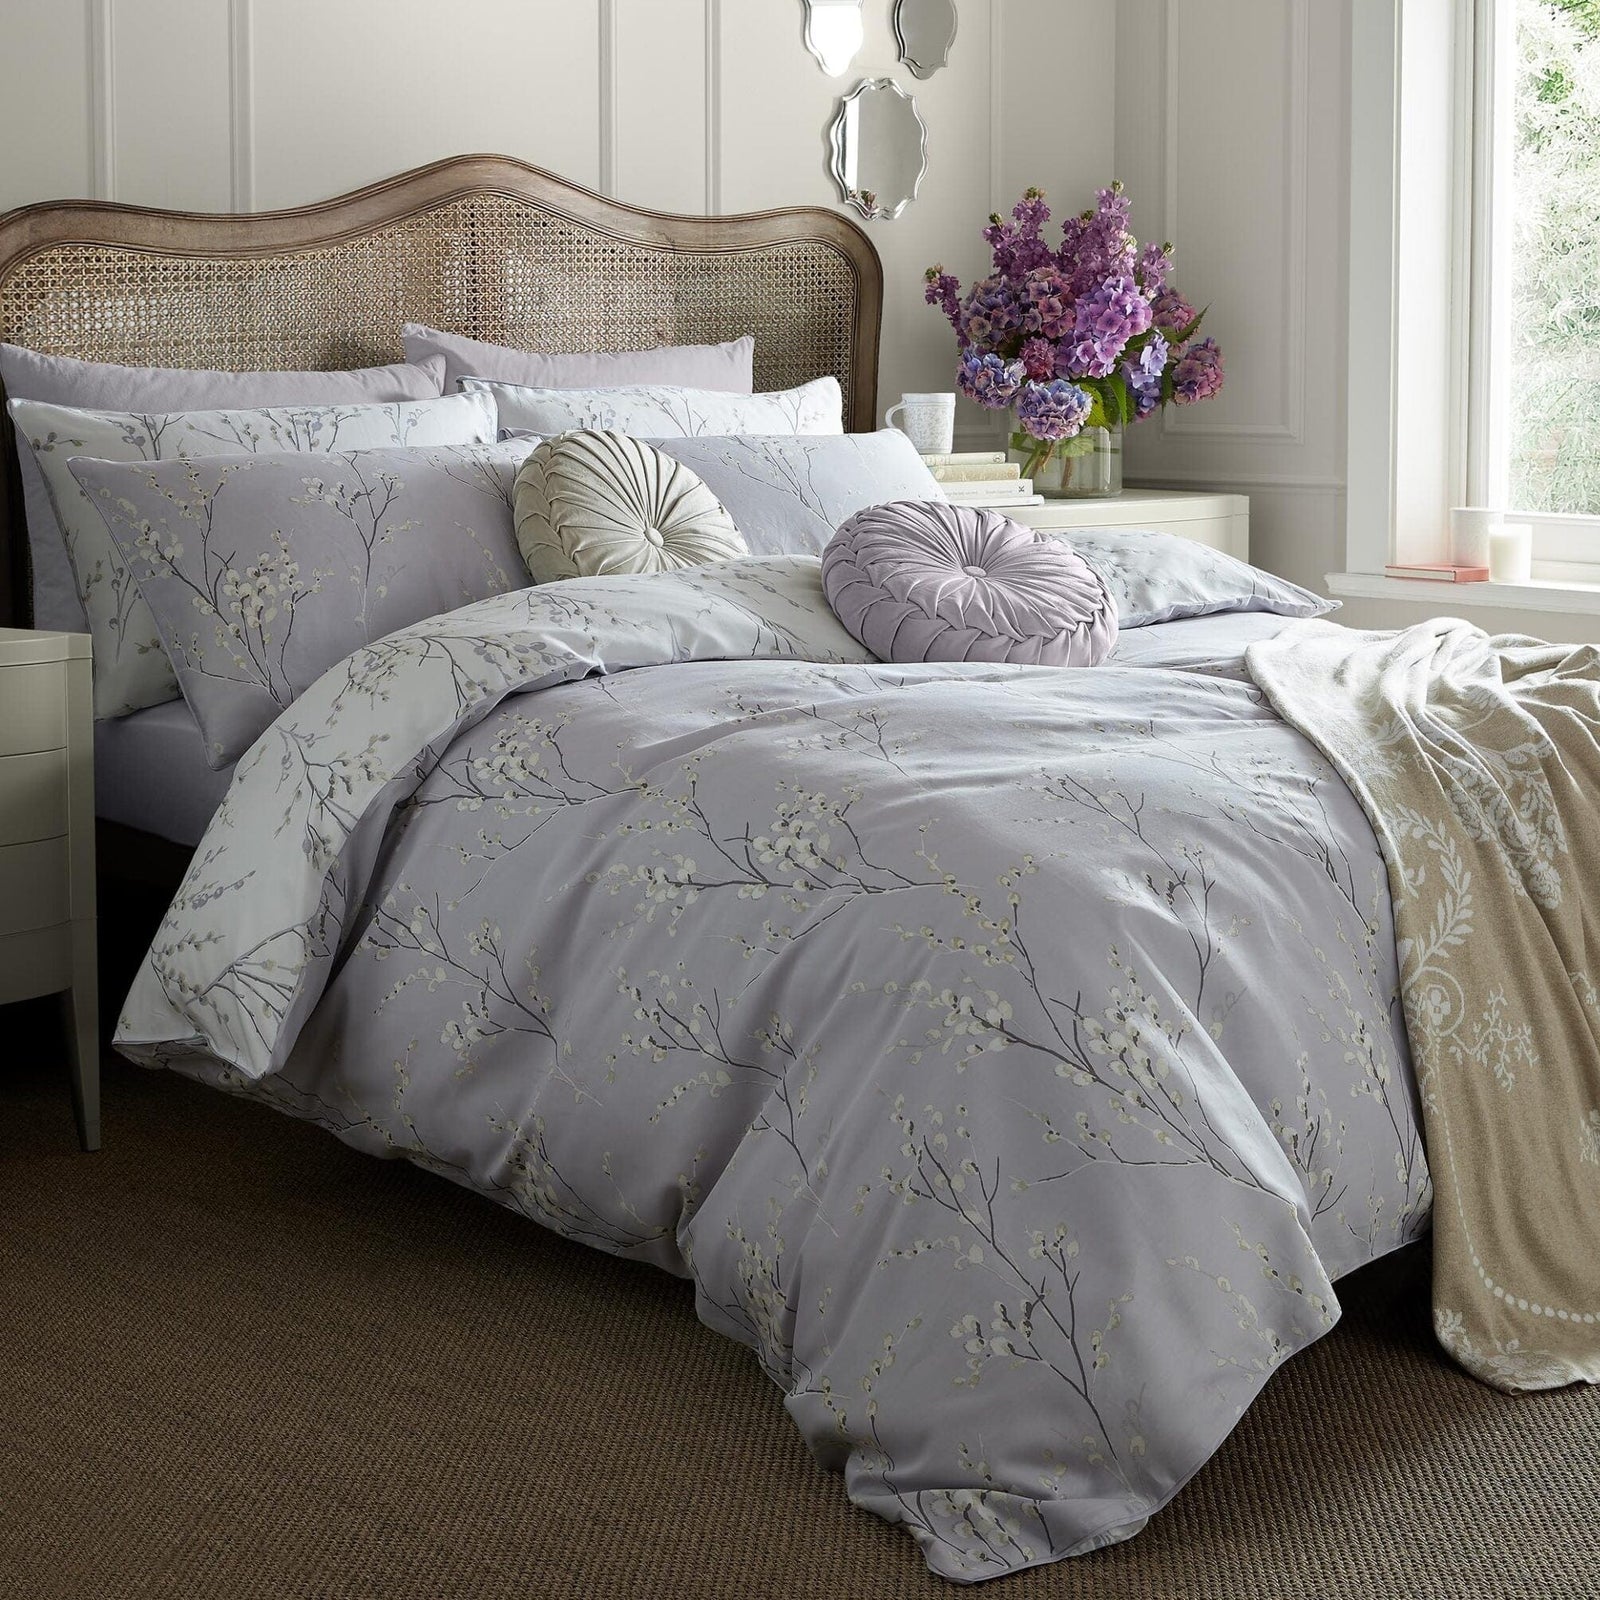 Laura Ashley Pussy Willow King Quilt Set 230cm x 220cm in Lavender